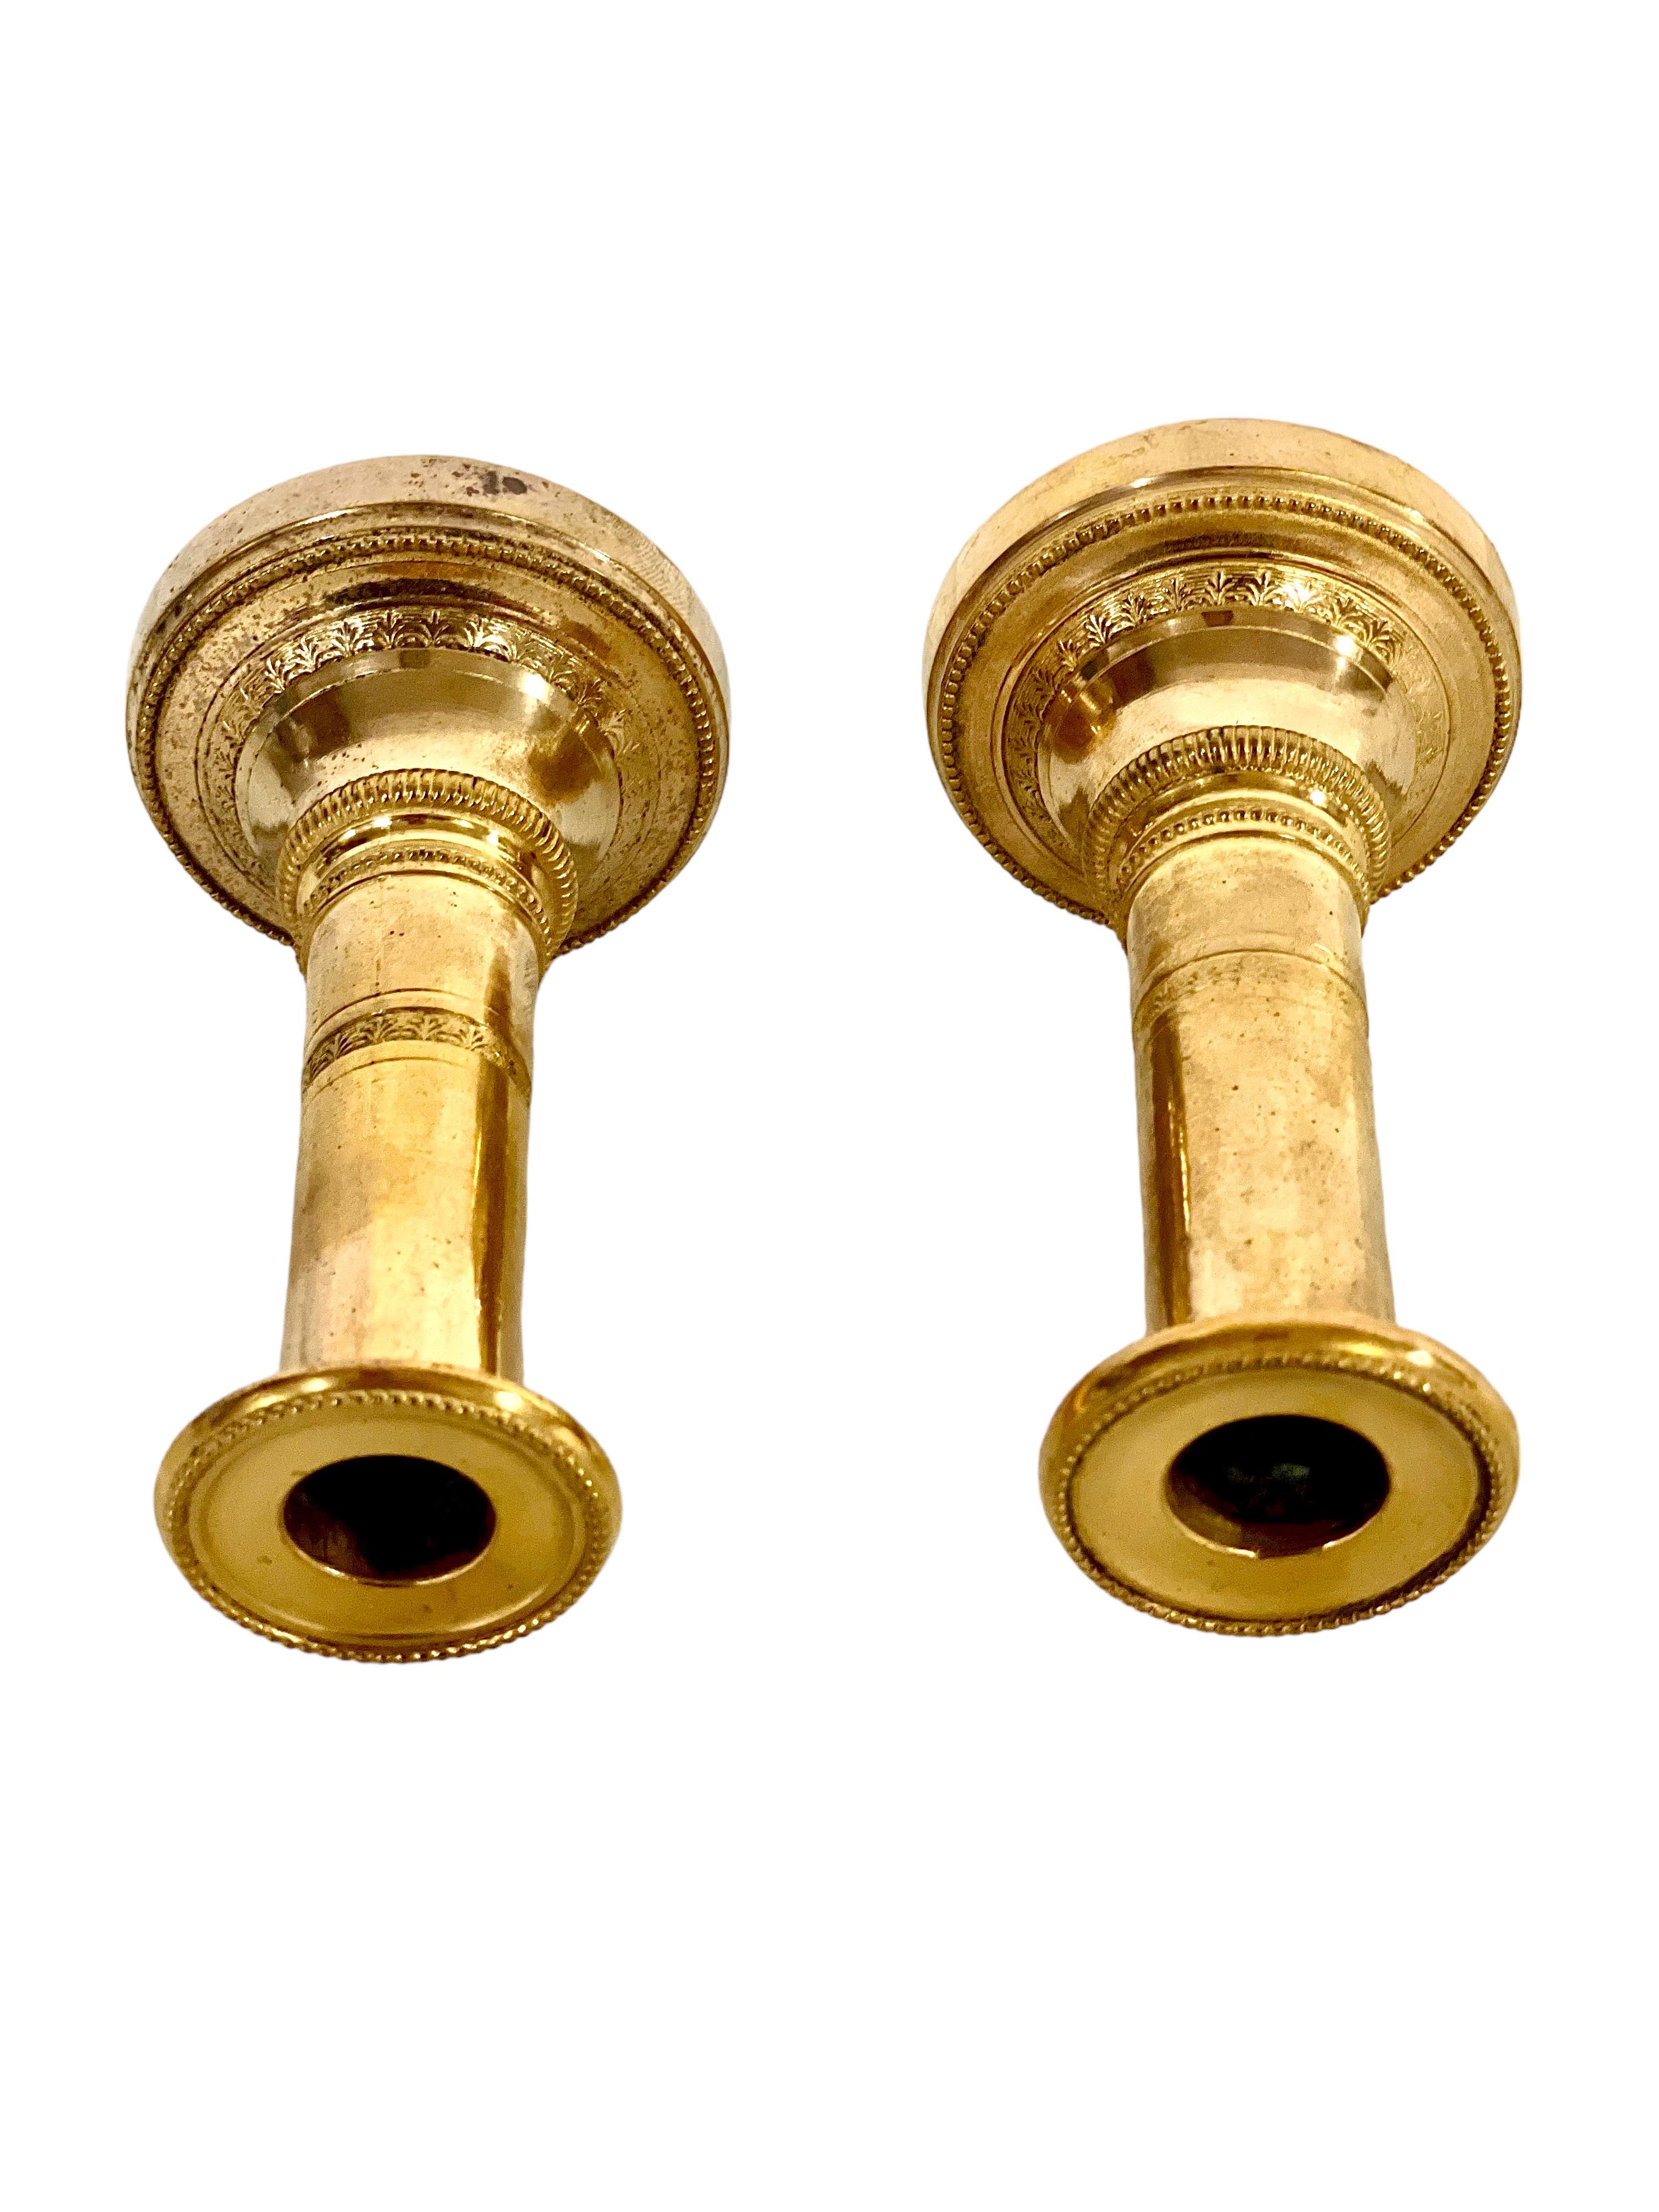 A fine pair of 19th-century 'gun barrel' candlesticks in gilt bronze, in a simple but elegant design. Standing around 10cm high, each of these petite candle holders rests on a spreading circular base, which has been embellished with a crisp and